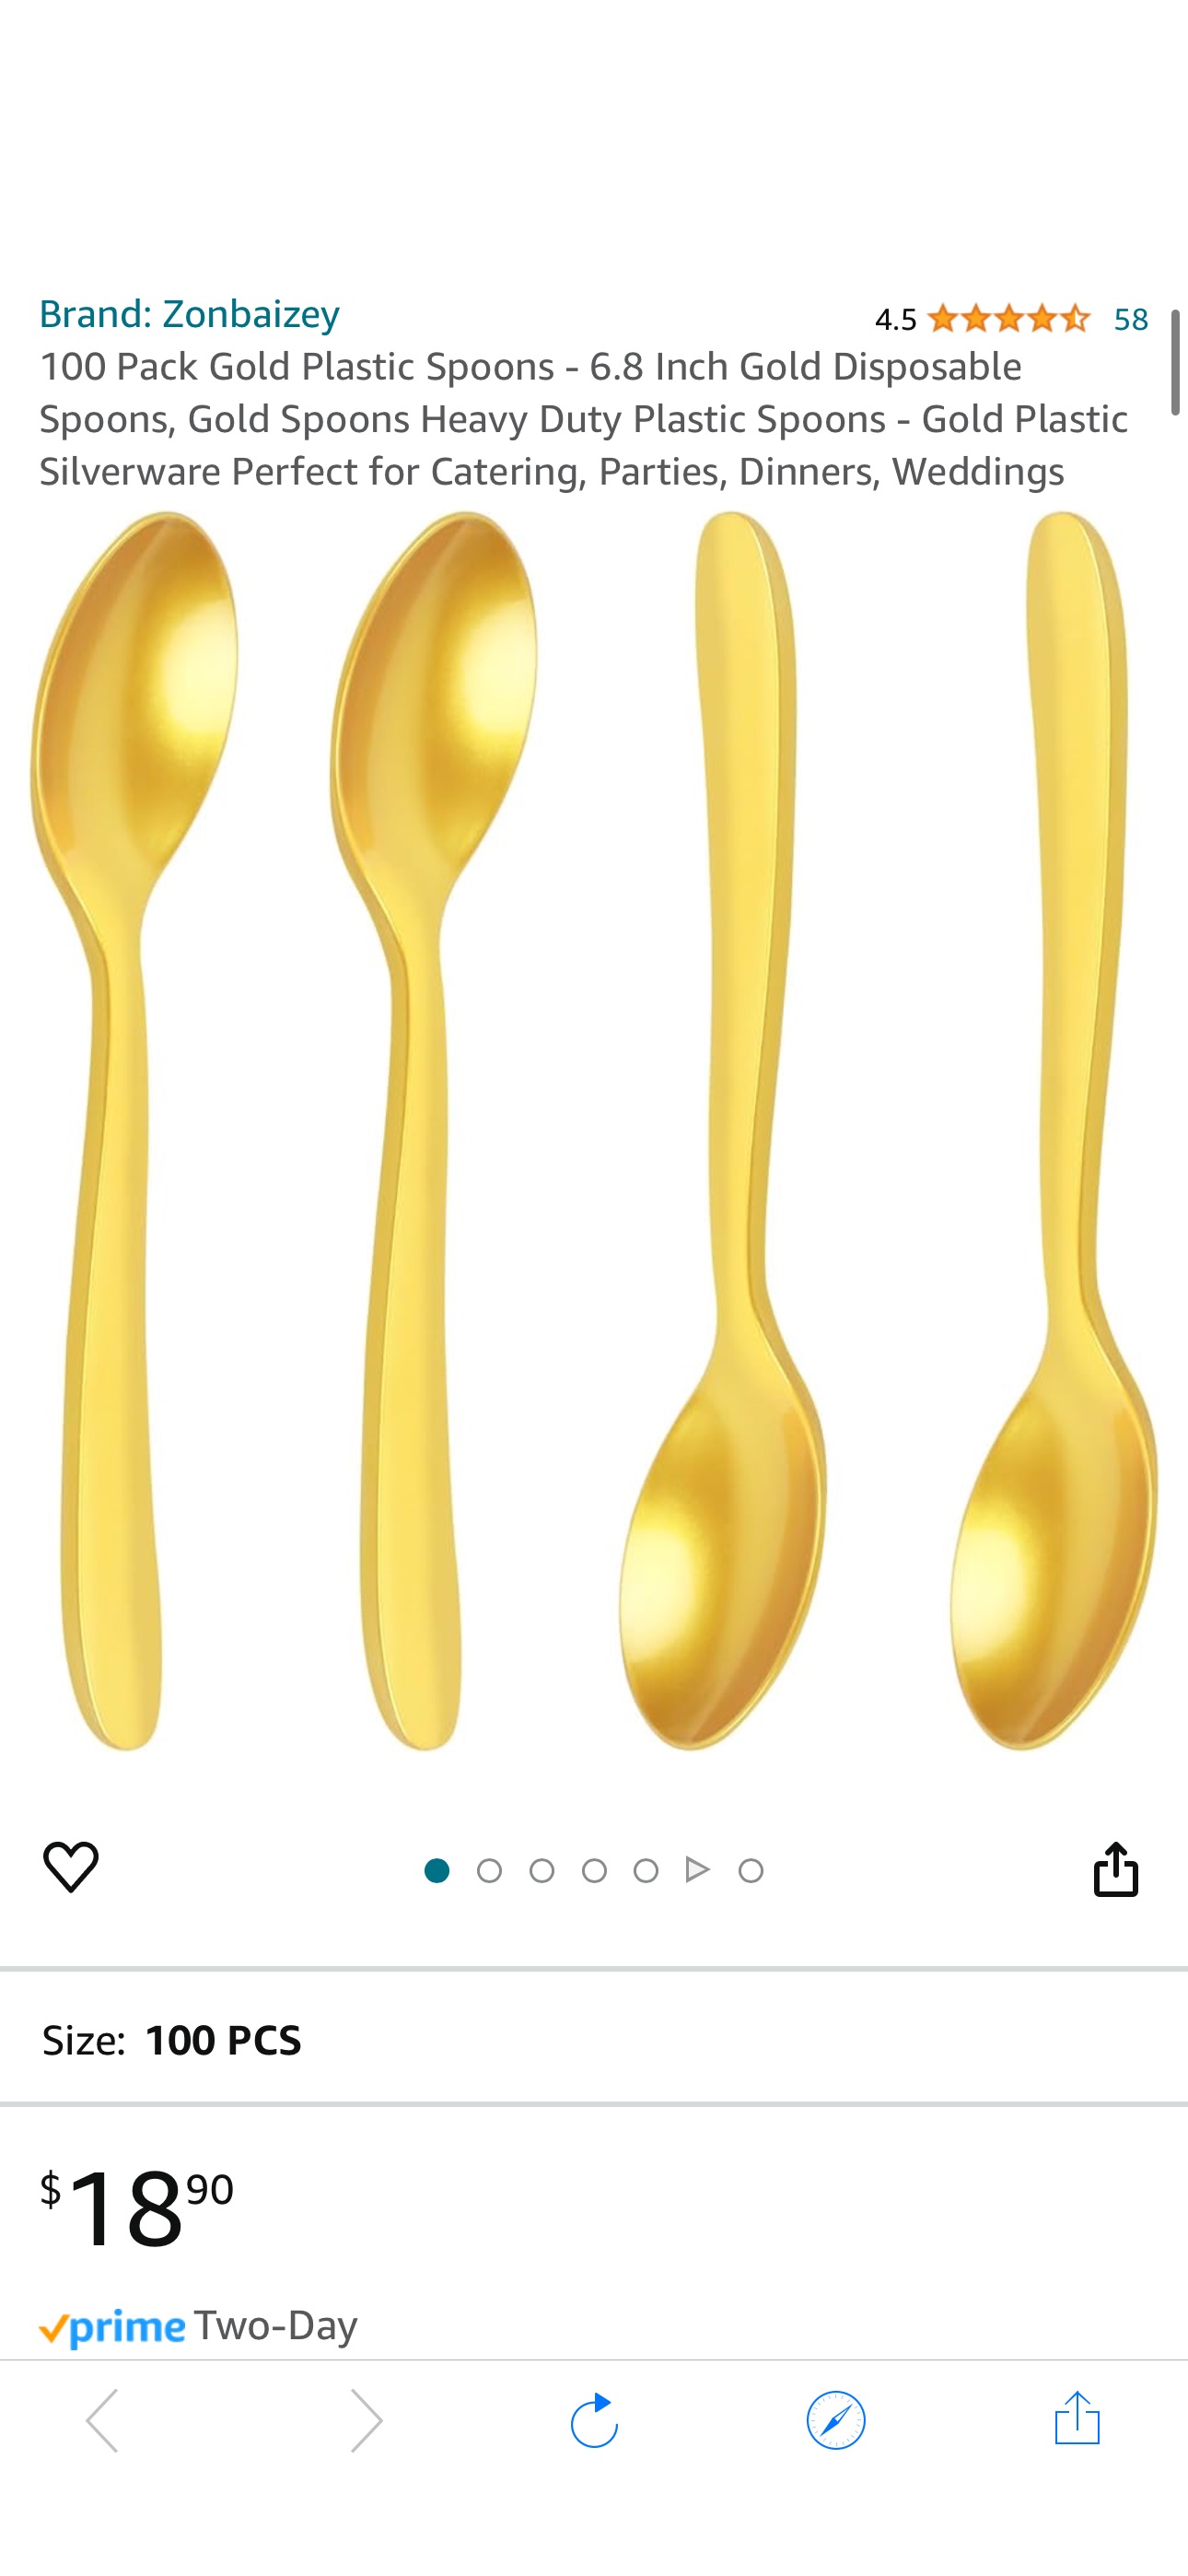 Amazon.com: 100 Pack Gold Plastic Spoons - 6.8 Inch Gold Disposable Spoons, Gold Spoons Heavy Duty Plastic Spoons 5.67 after 20%Q+ code GAT2WT8I